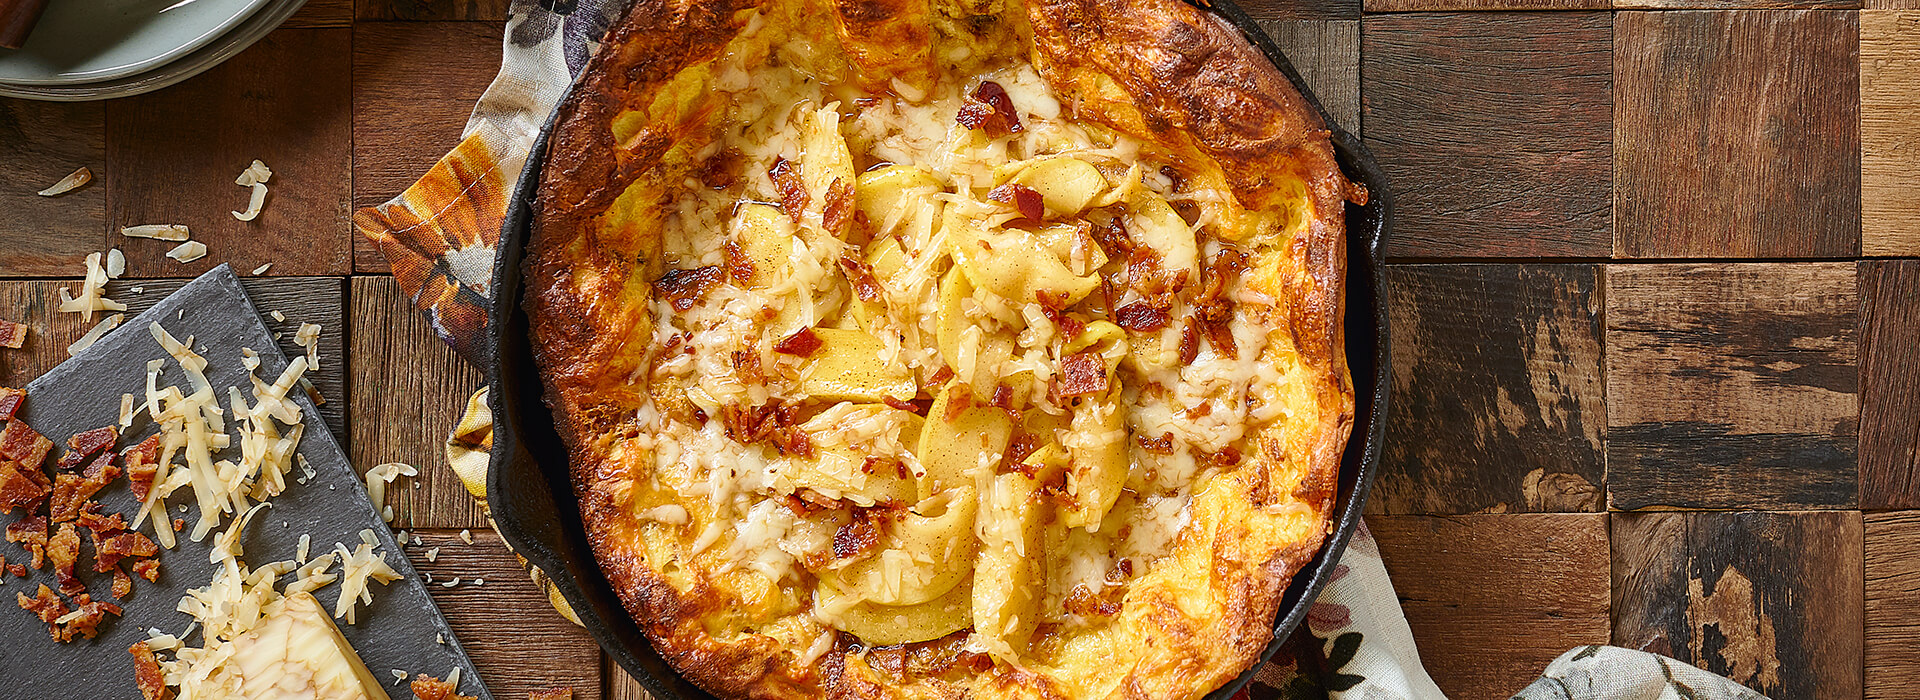 Maple Cheddar Cheese Dutch Baby Recipe | Wisconsin Cheese